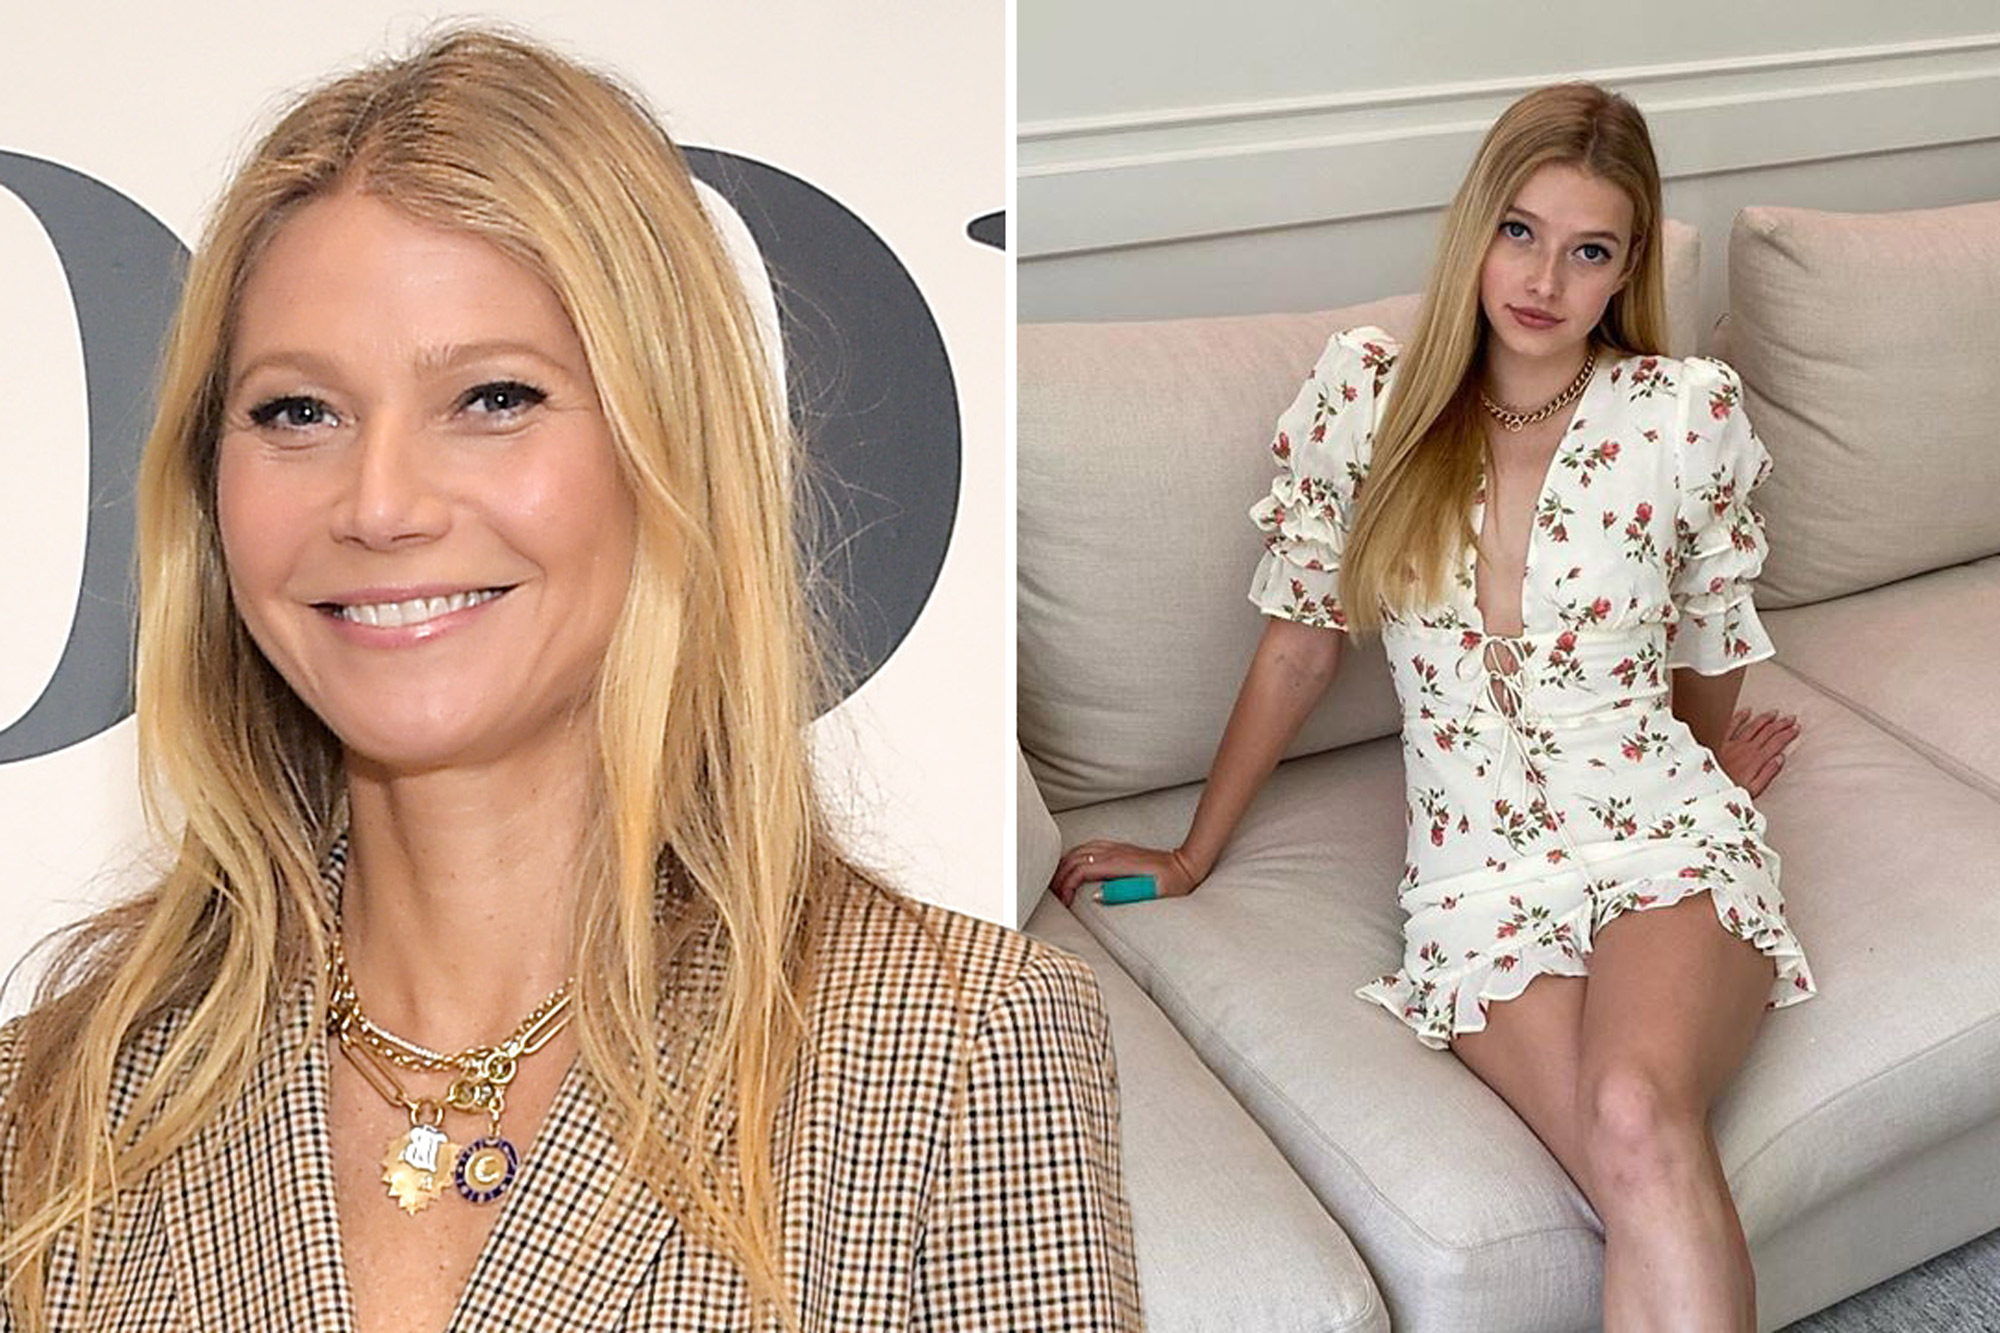 Paltrow's daughter stuns in 16th birthday photos